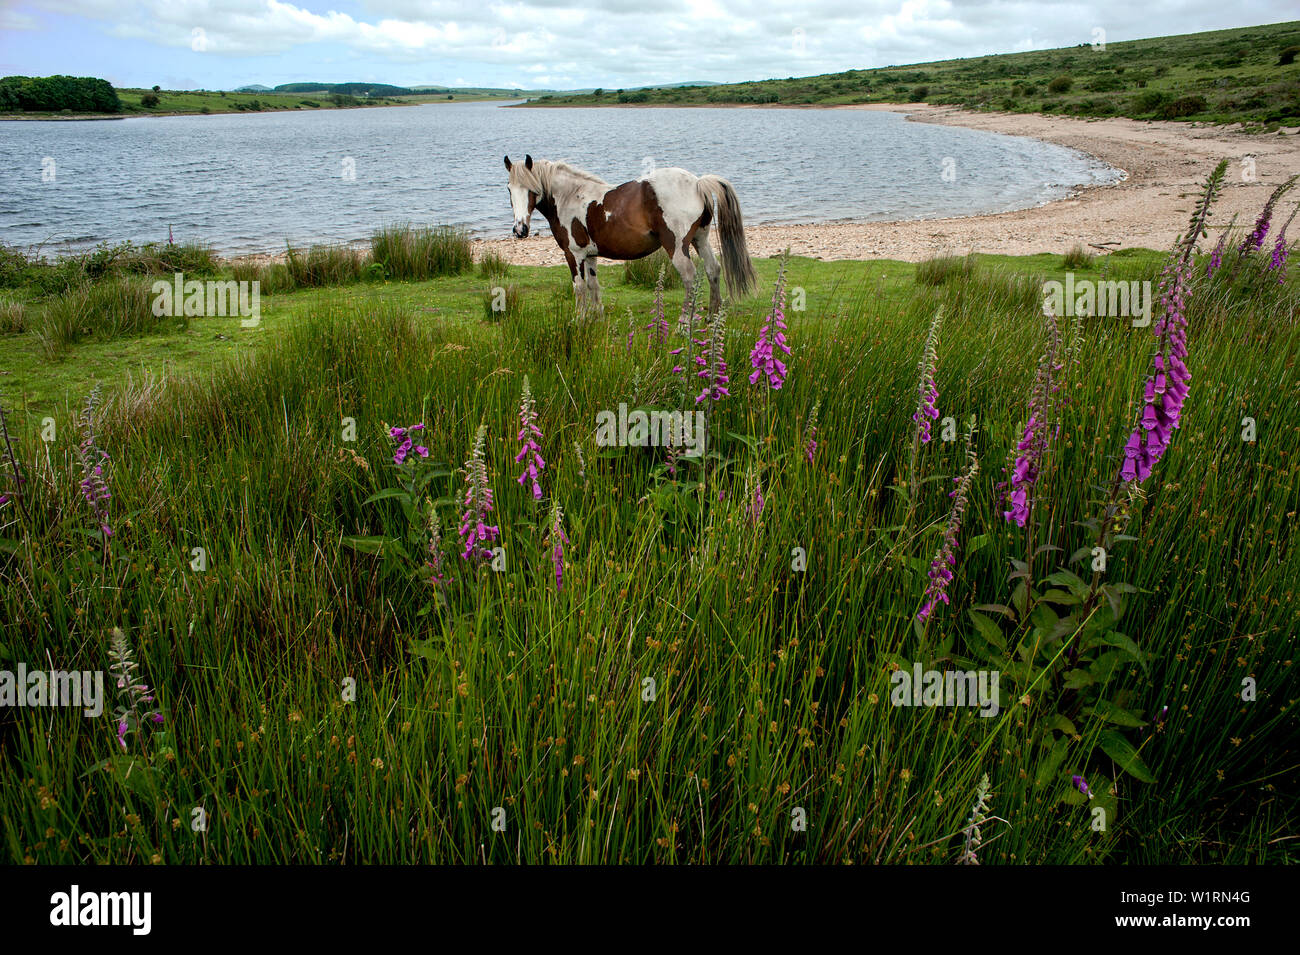 Wild ponies grazing amongst the wild flowers of Bodmin Moor on the shores of Colliford Lake in Cornwall, England. Stock Photo